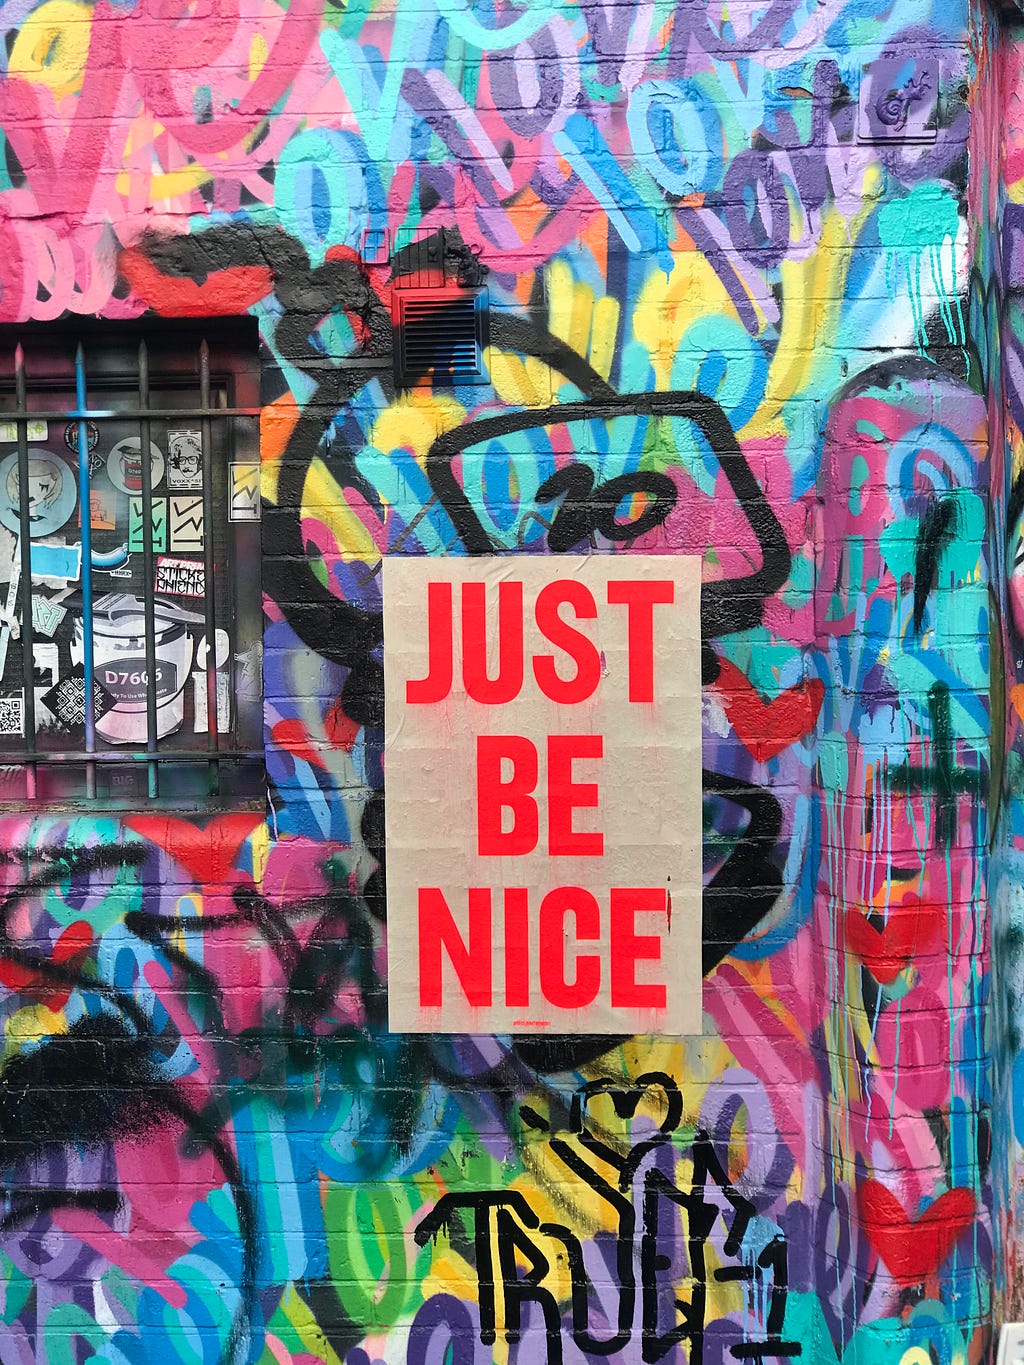 A graffiti wall with the message “just be nice”